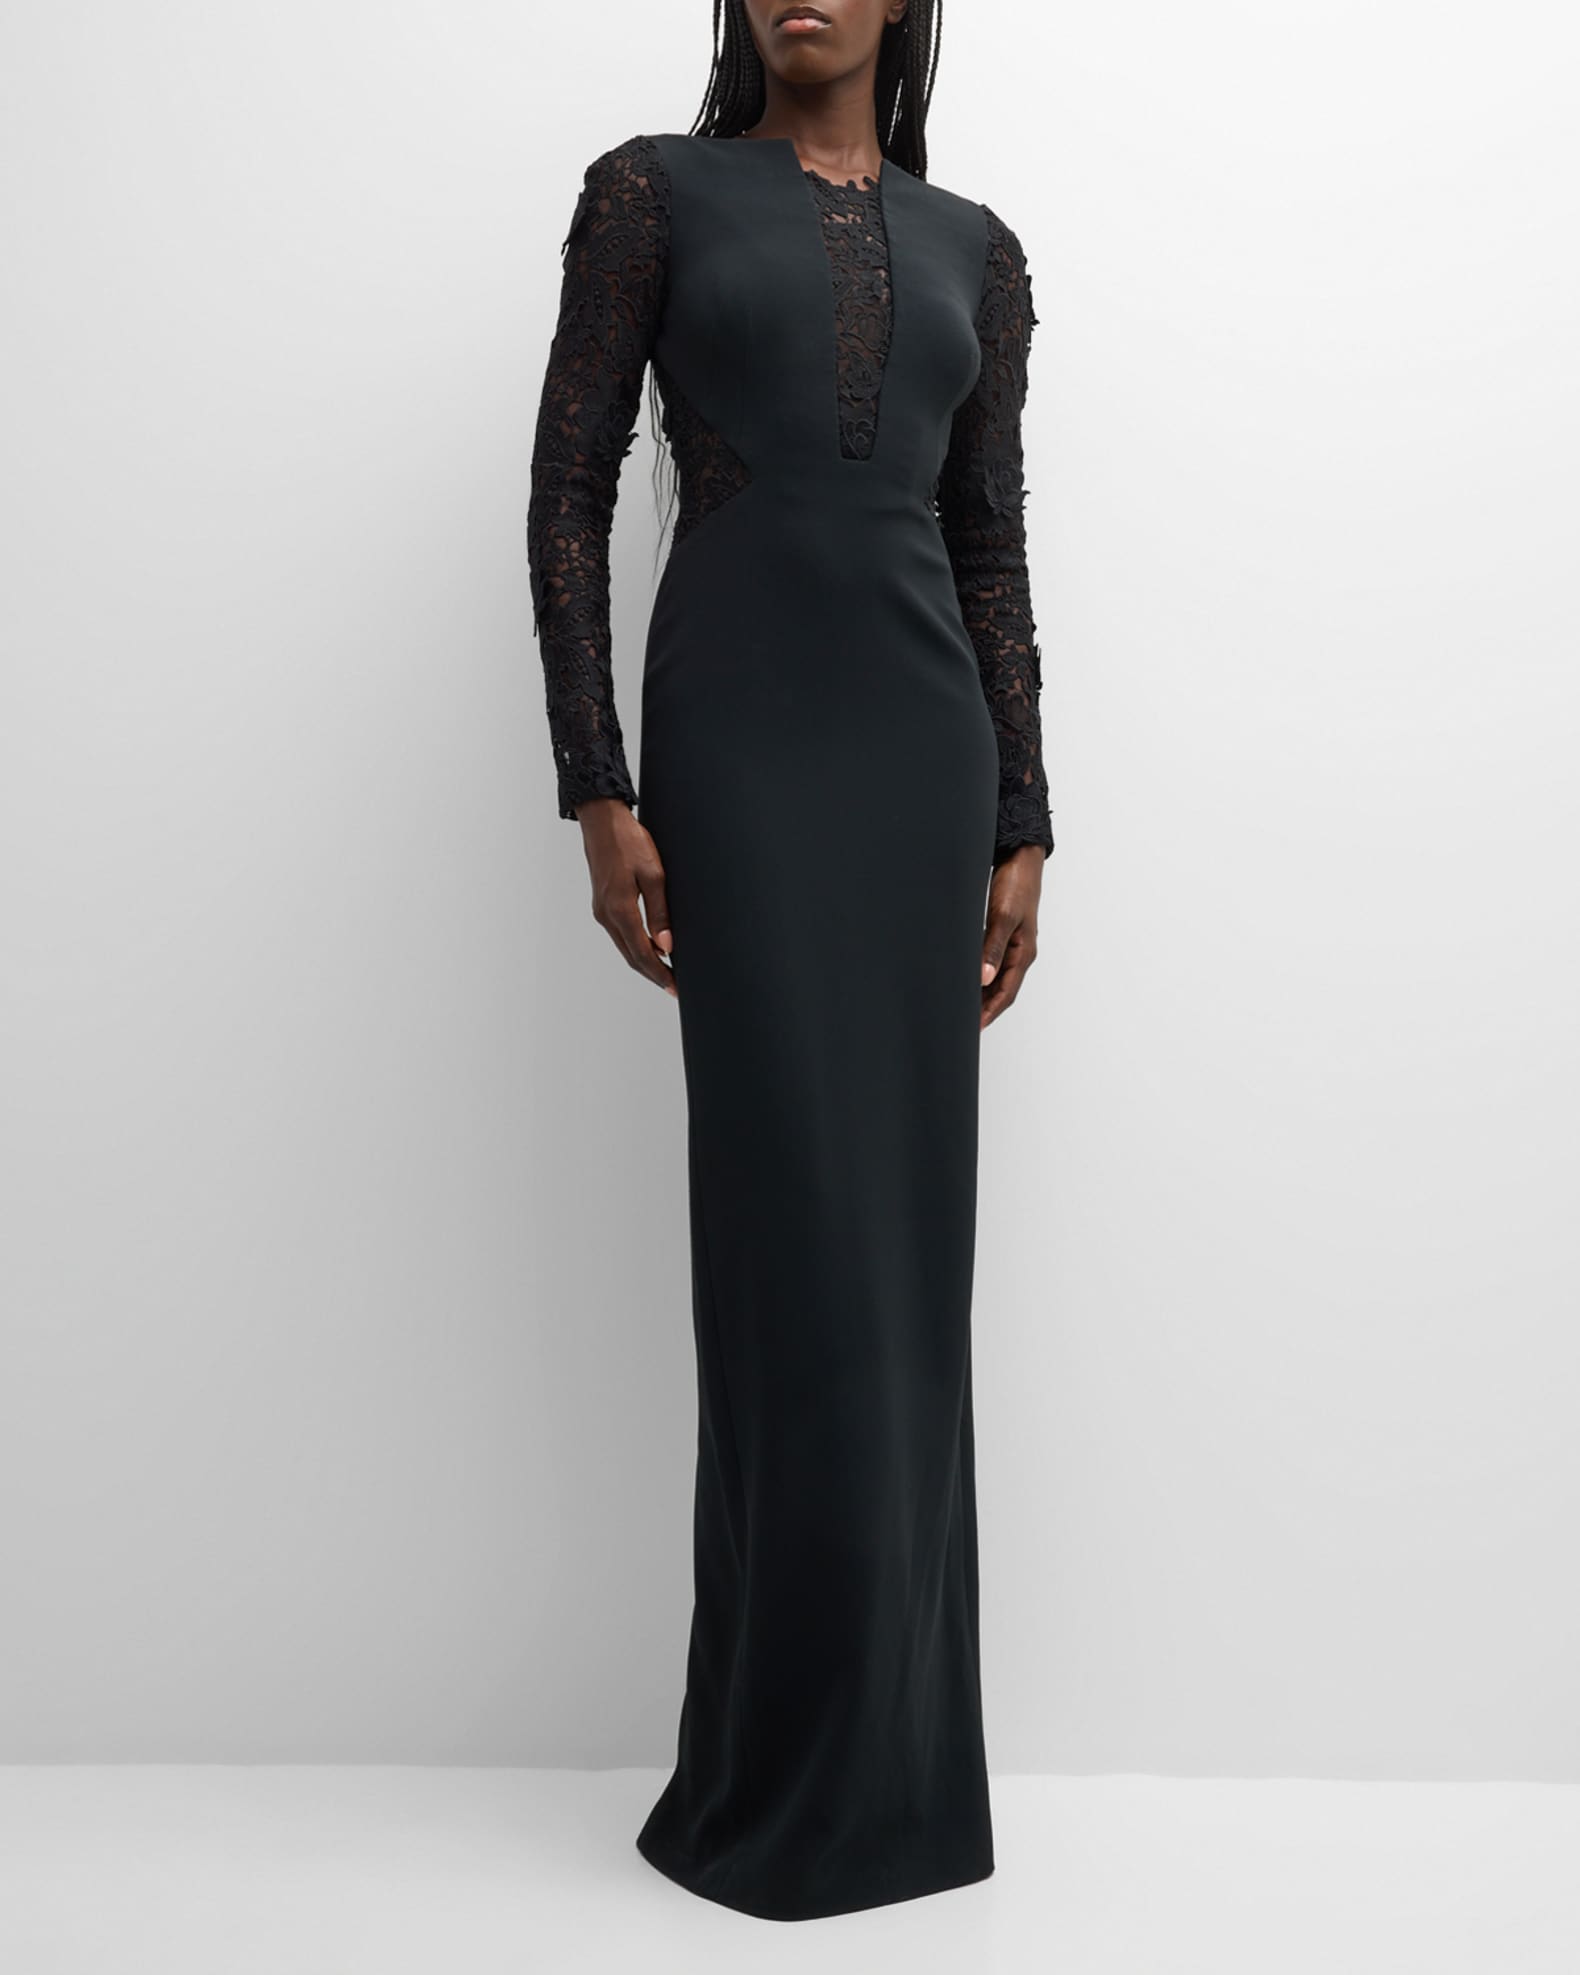 Pamella Roland Black Crepe Gown with Lace Panels and Sleeves | Neiman ...